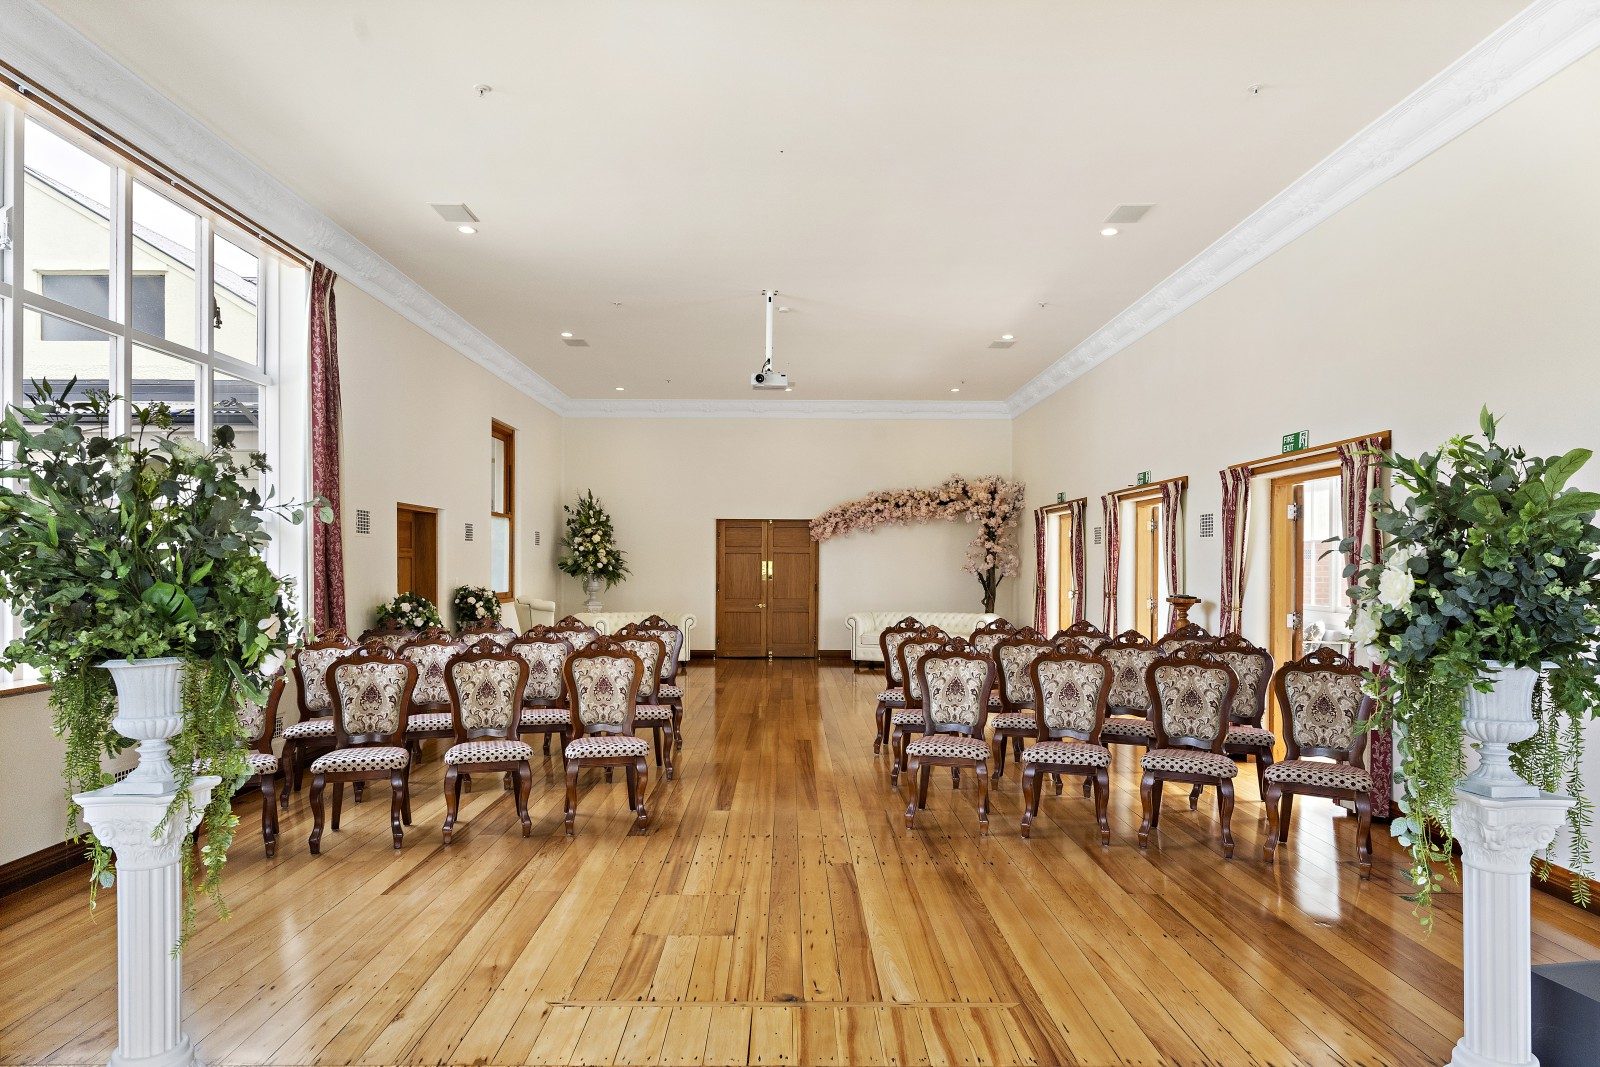 Ballroom at the property set up for a wedding with beautiful antique chairs